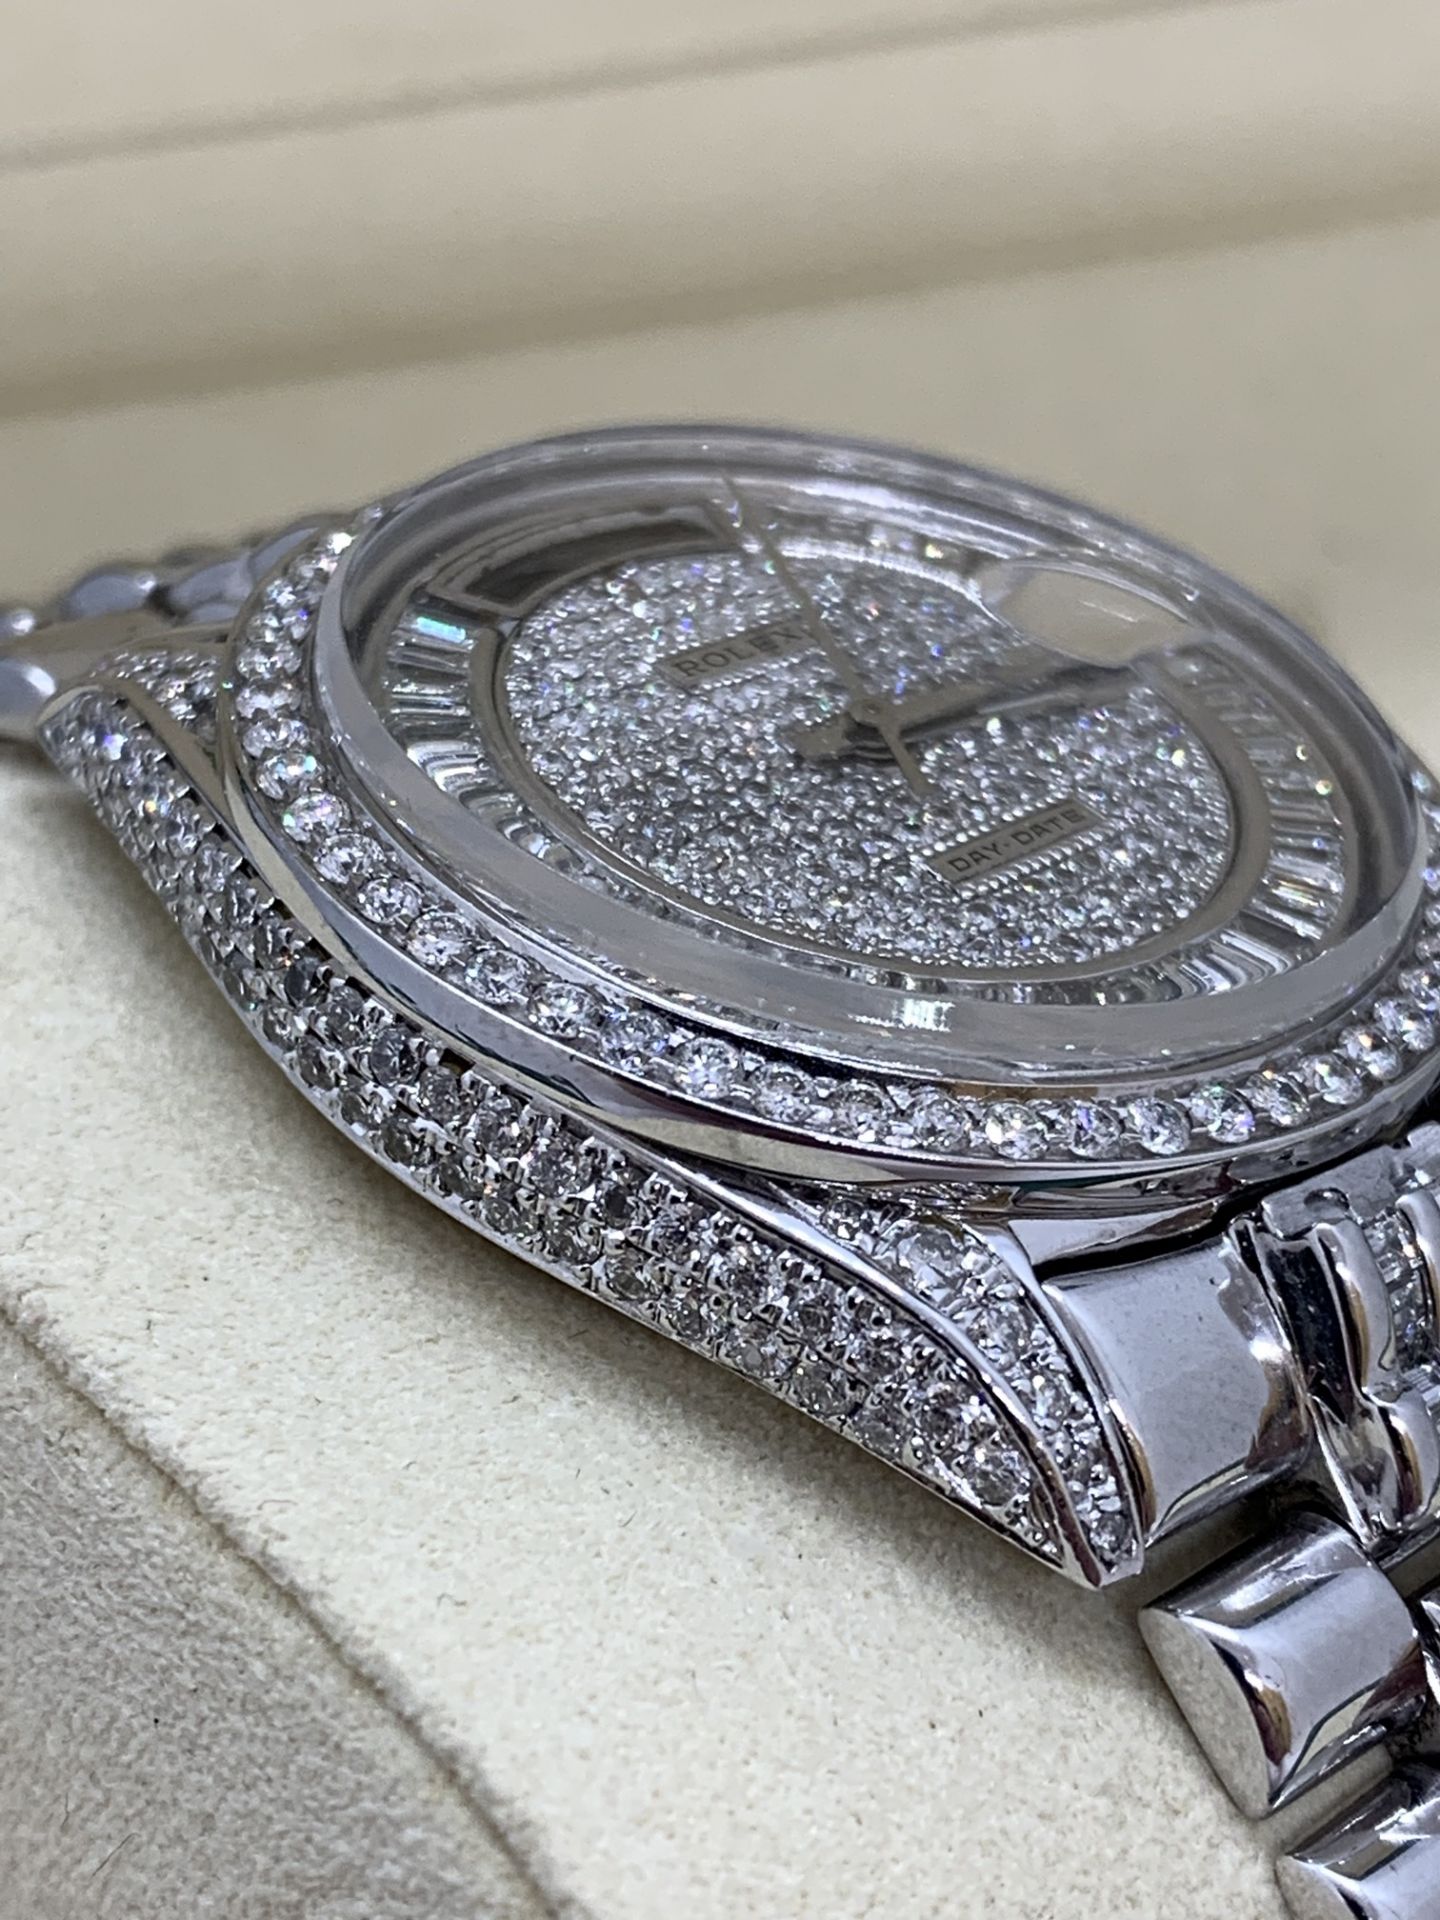 36mm DIAMOND SET DAY-DATE WATCH MARKED ROLEX SET IN WHITE METAL (TESTED AS GOLD) - Image 9 of 15